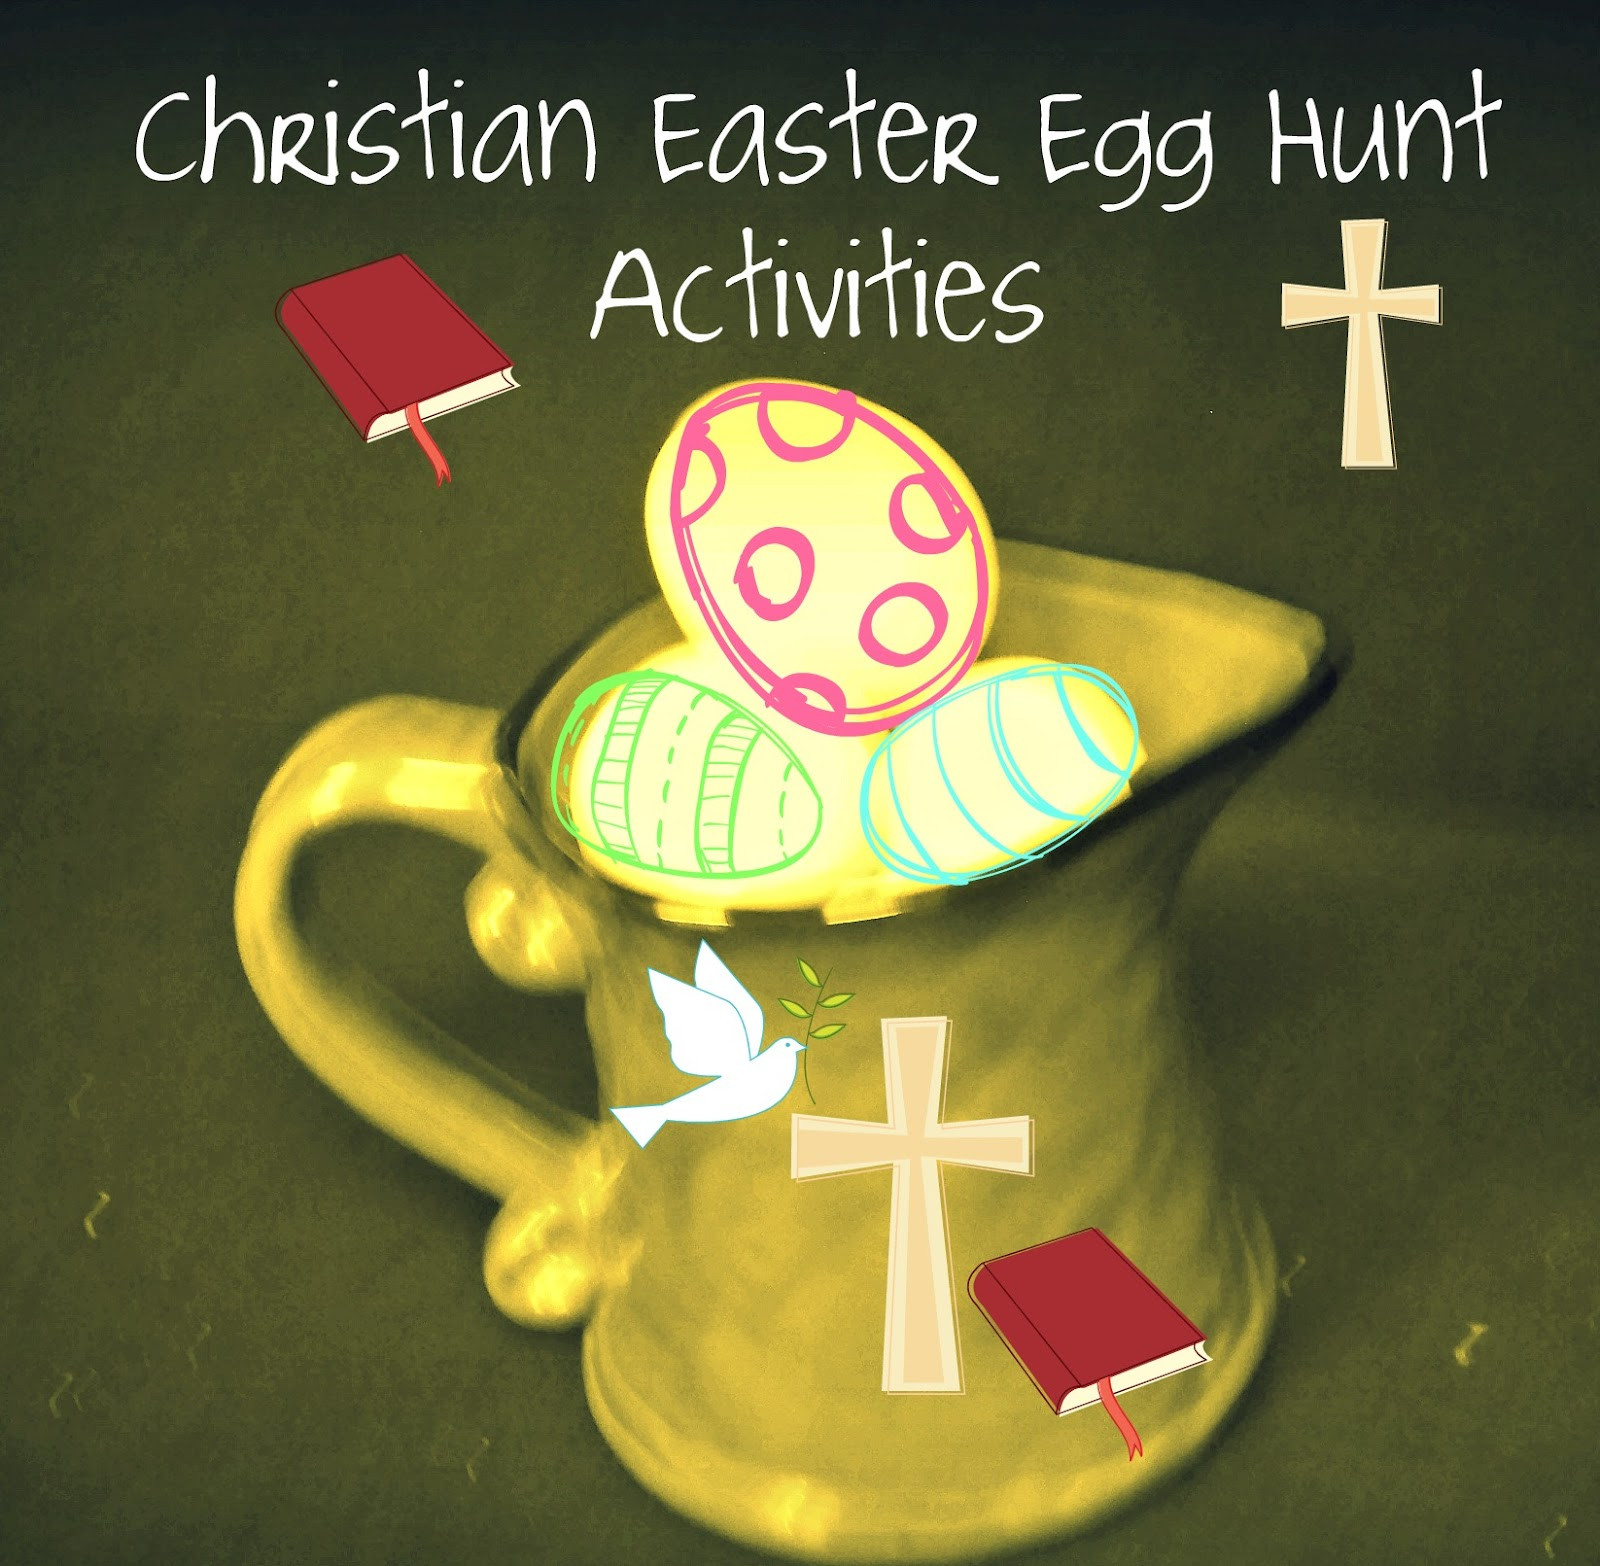 Easter Egg Hunt Activities
 Pins and Princesses Christian Easter Egg Hunt Activities